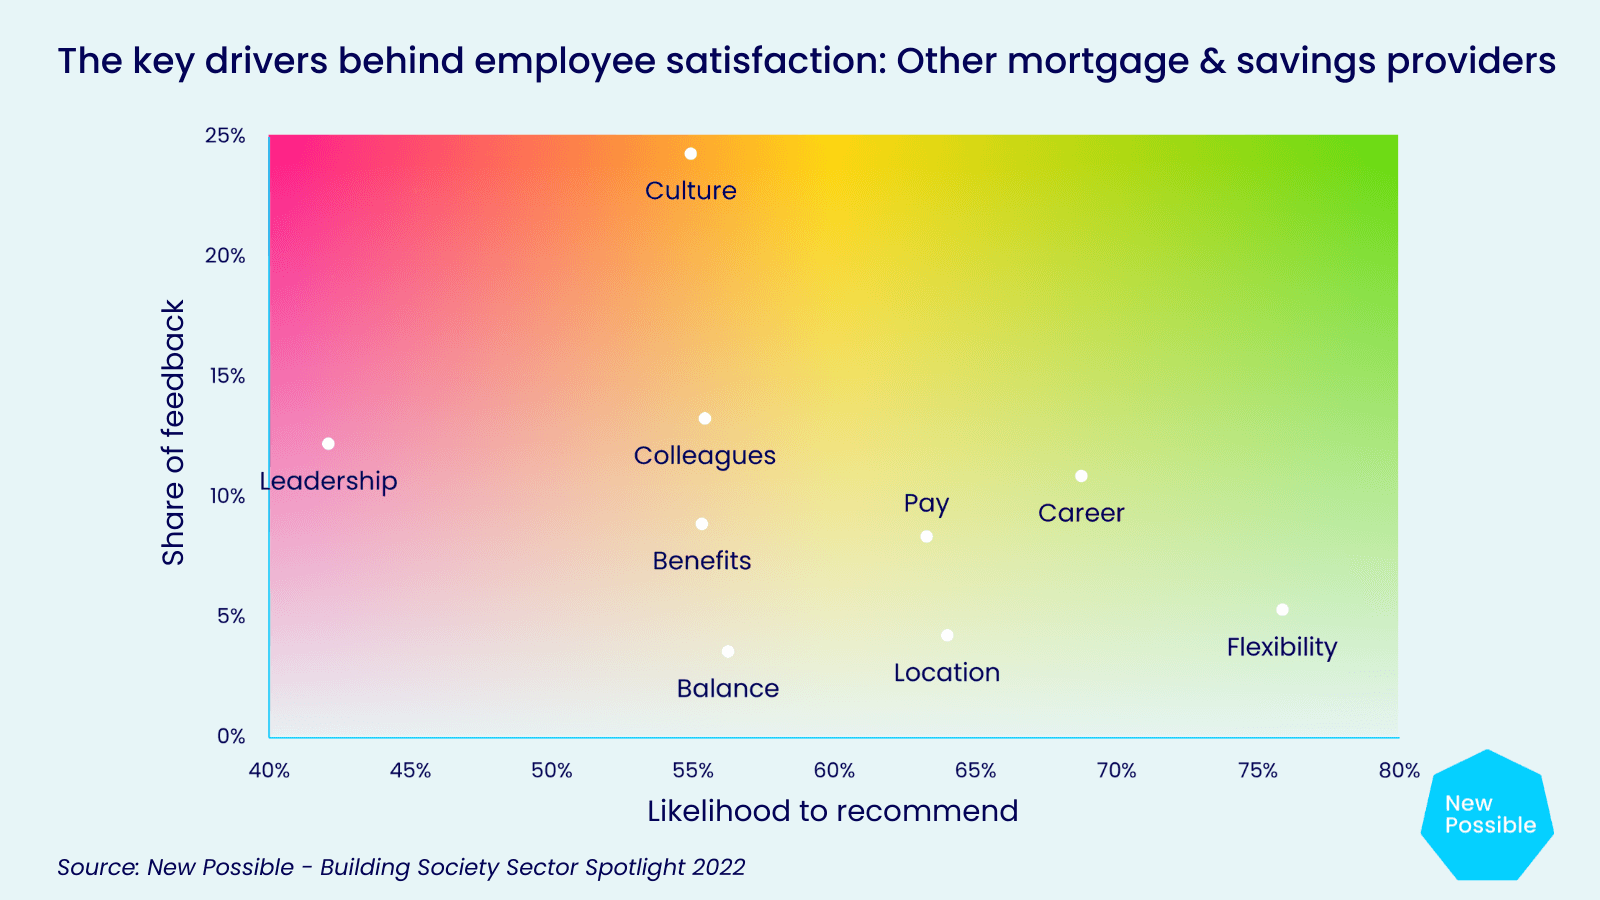 Key drivers behind employee satisfaction at other mortgage and savings providers